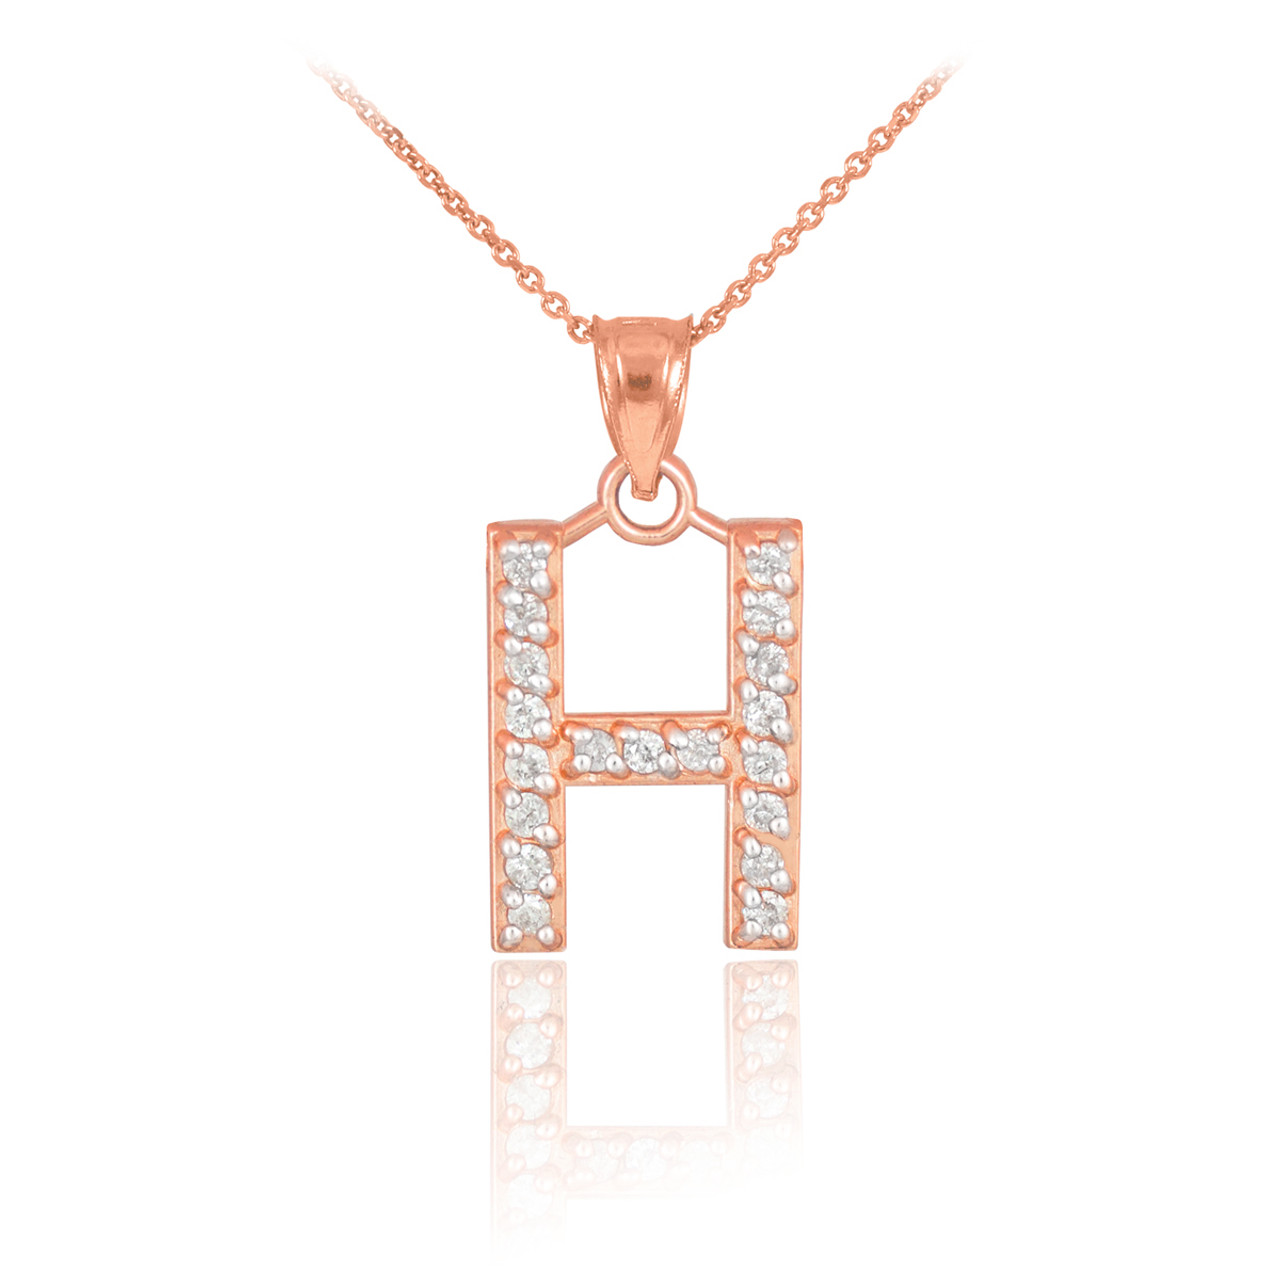 10k White Gold Small Script Initial Letter H Pendant Necklace for Women  Adjustable Chain Size 16 to 18 inches with Spring Ring Clasp by MAX + STONE  - Walmart.com